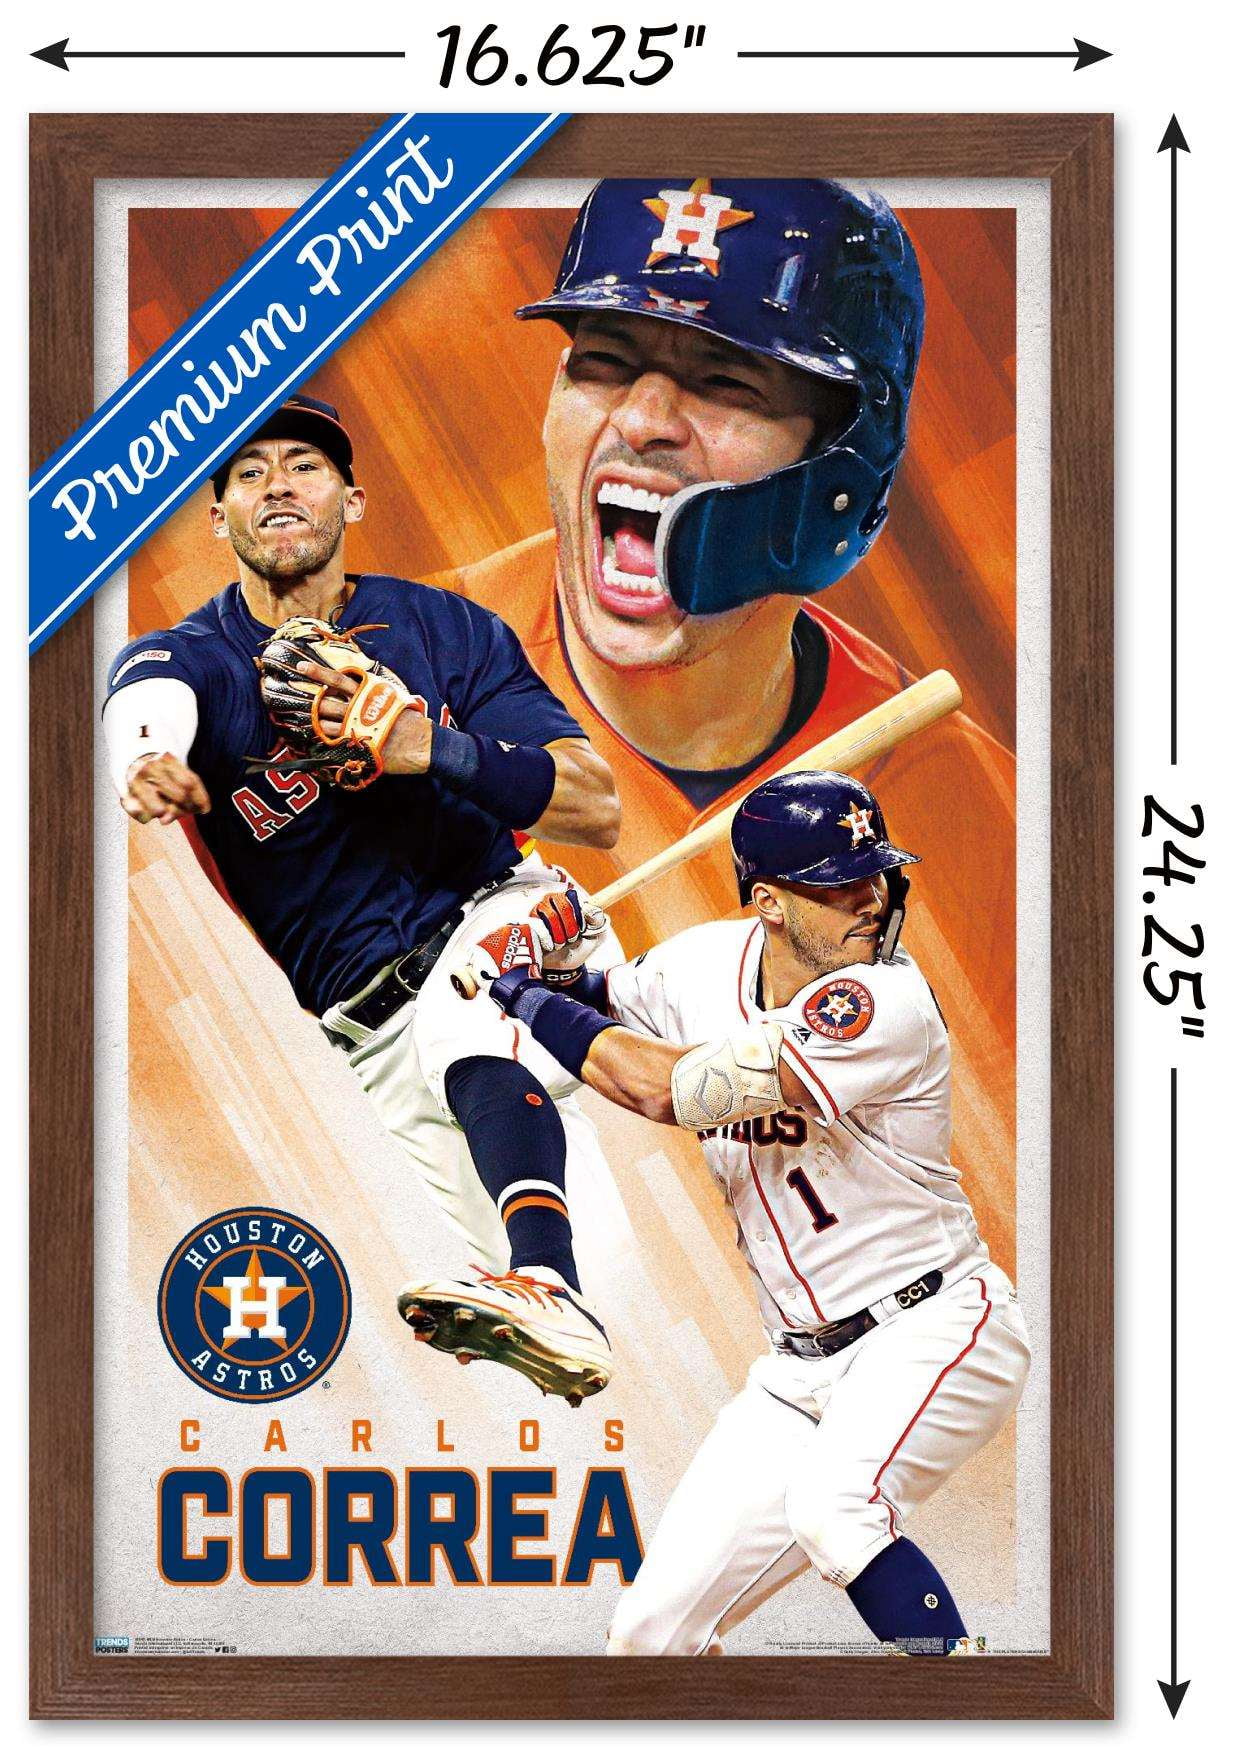 MLB Houston Astros - Minute Maid Park 22 Wall Poster, 14.725 x